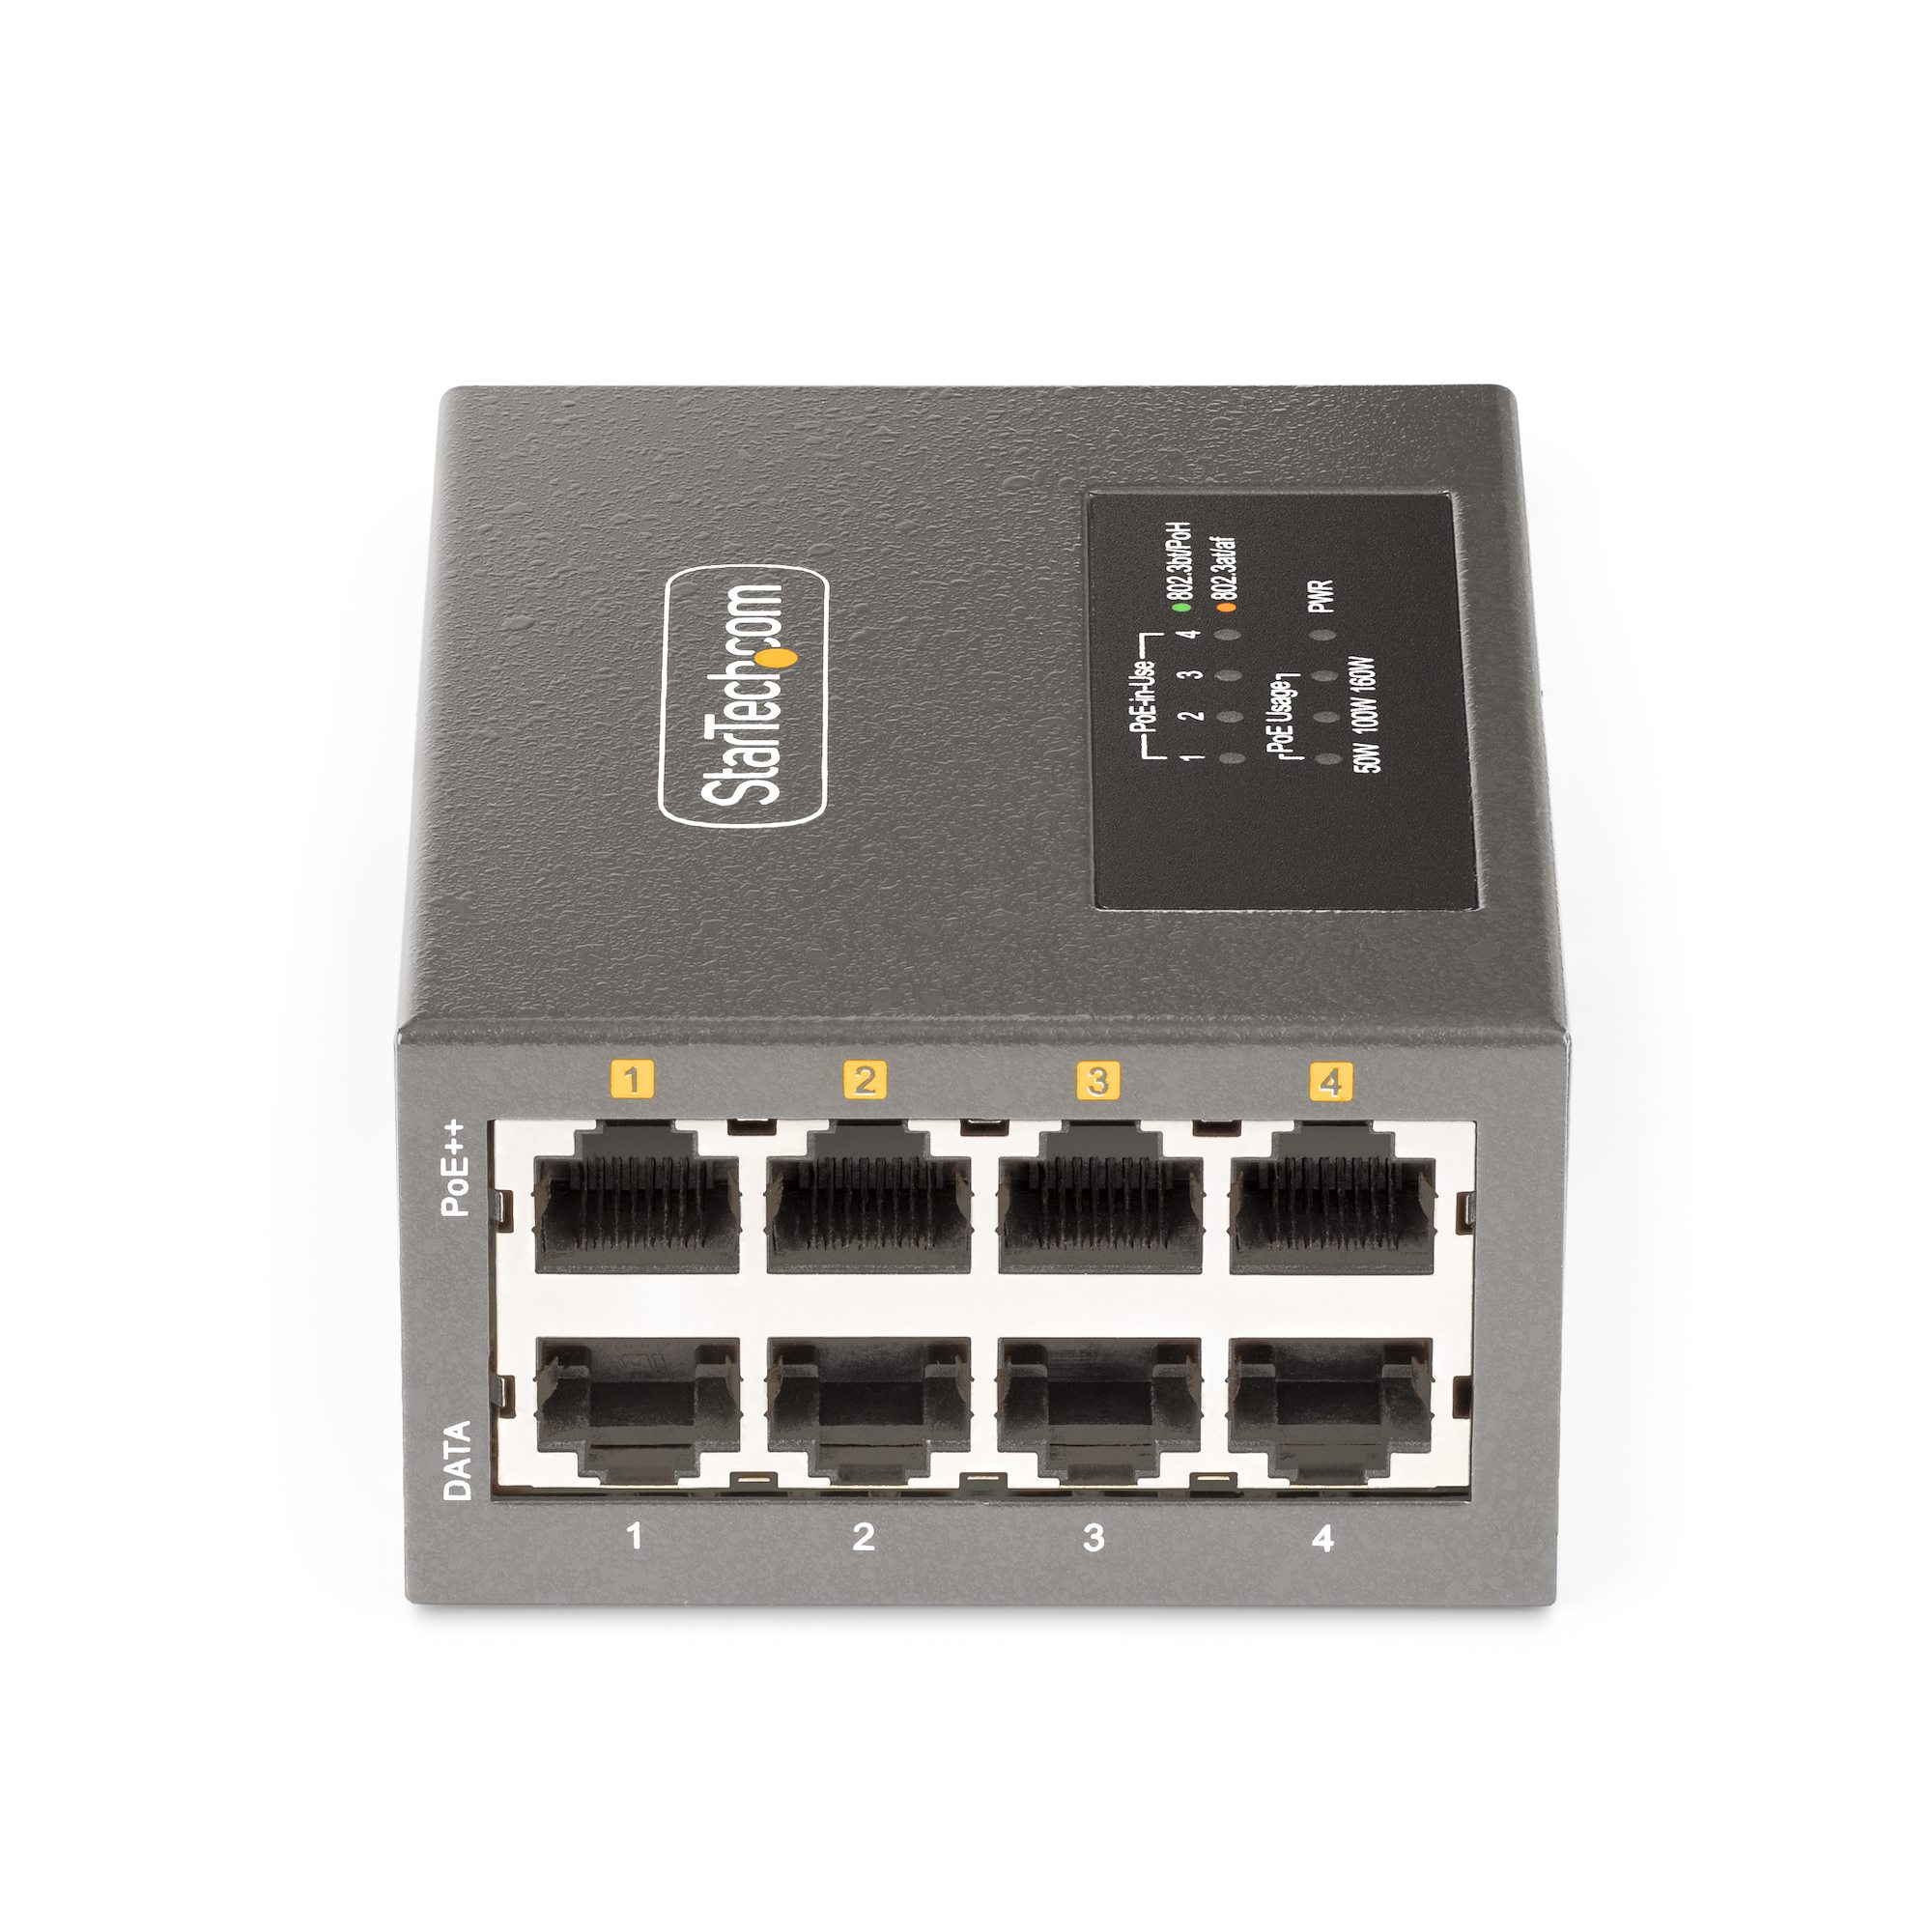 https://media.startech.com/cms/products/gallery_large/as445c-poe-injector.l.jpg